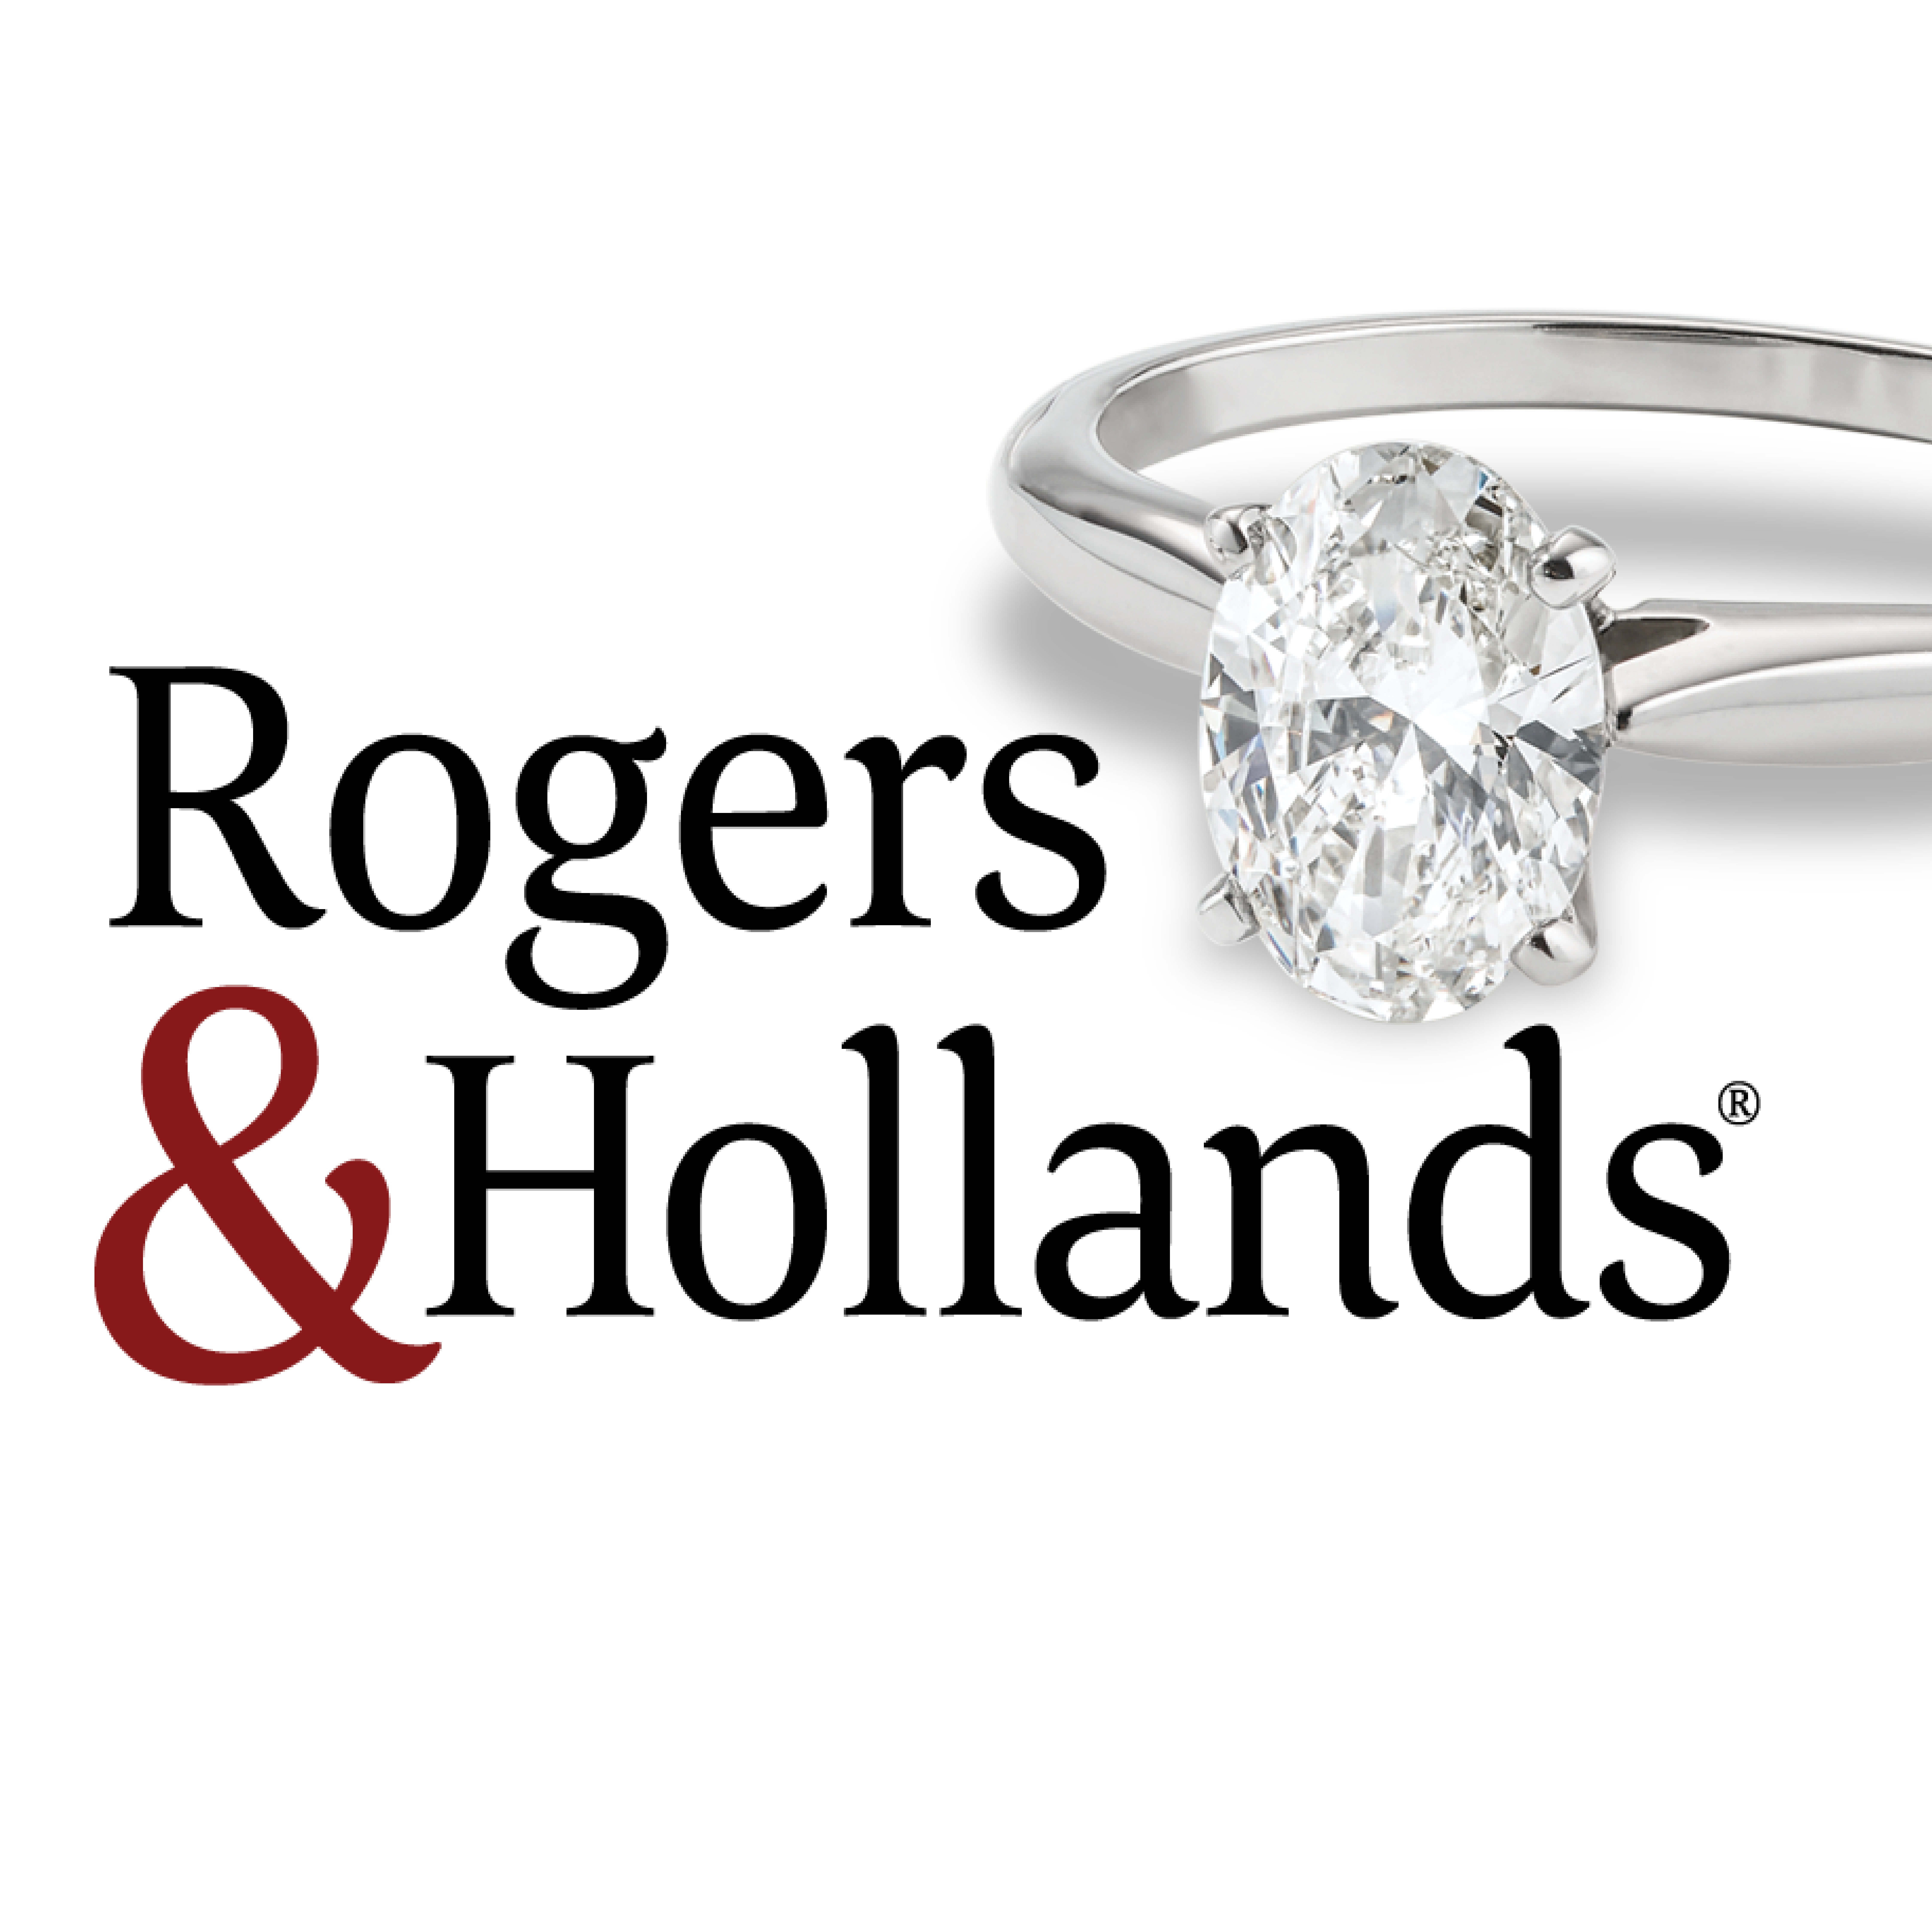 Rogers & Hollands® Jewelers Photo